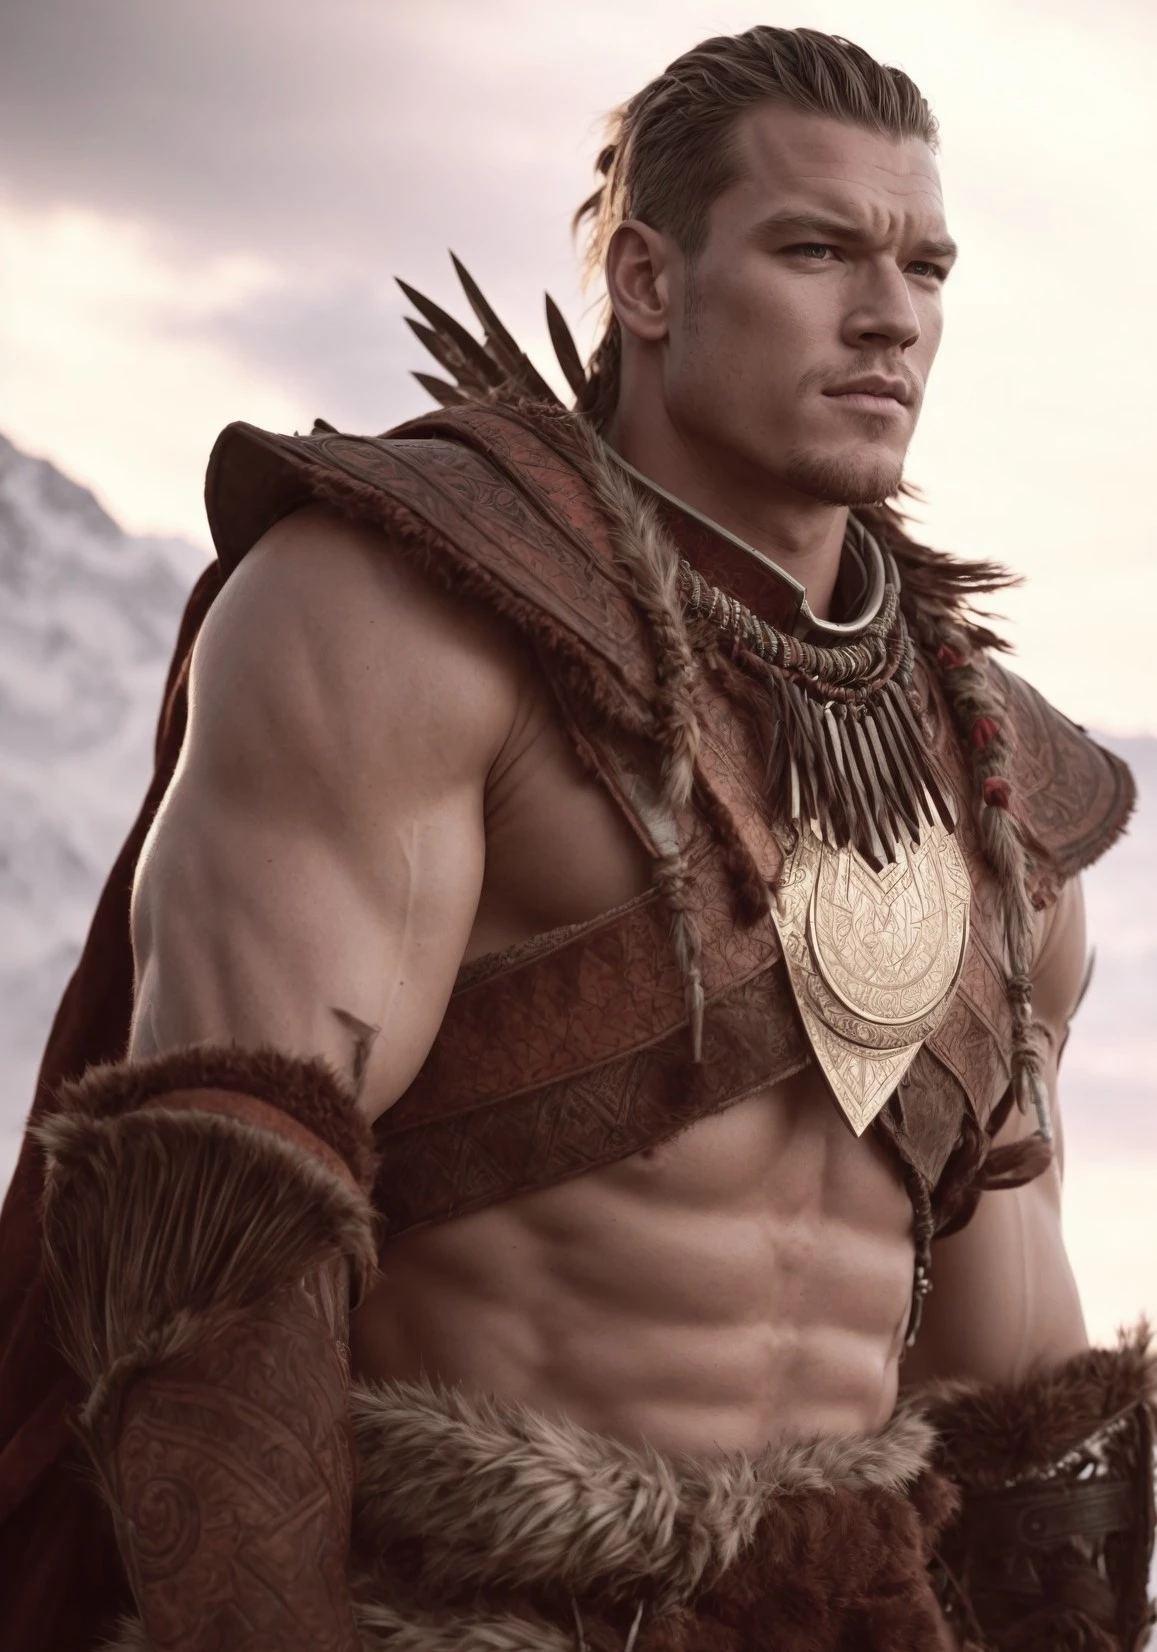 Reacher’s Rising Star, Alan Ritchson Is Cast As Helis, The Shadow Carja’s Leader, One Of The Antagonists In Horizon Zero Dawn